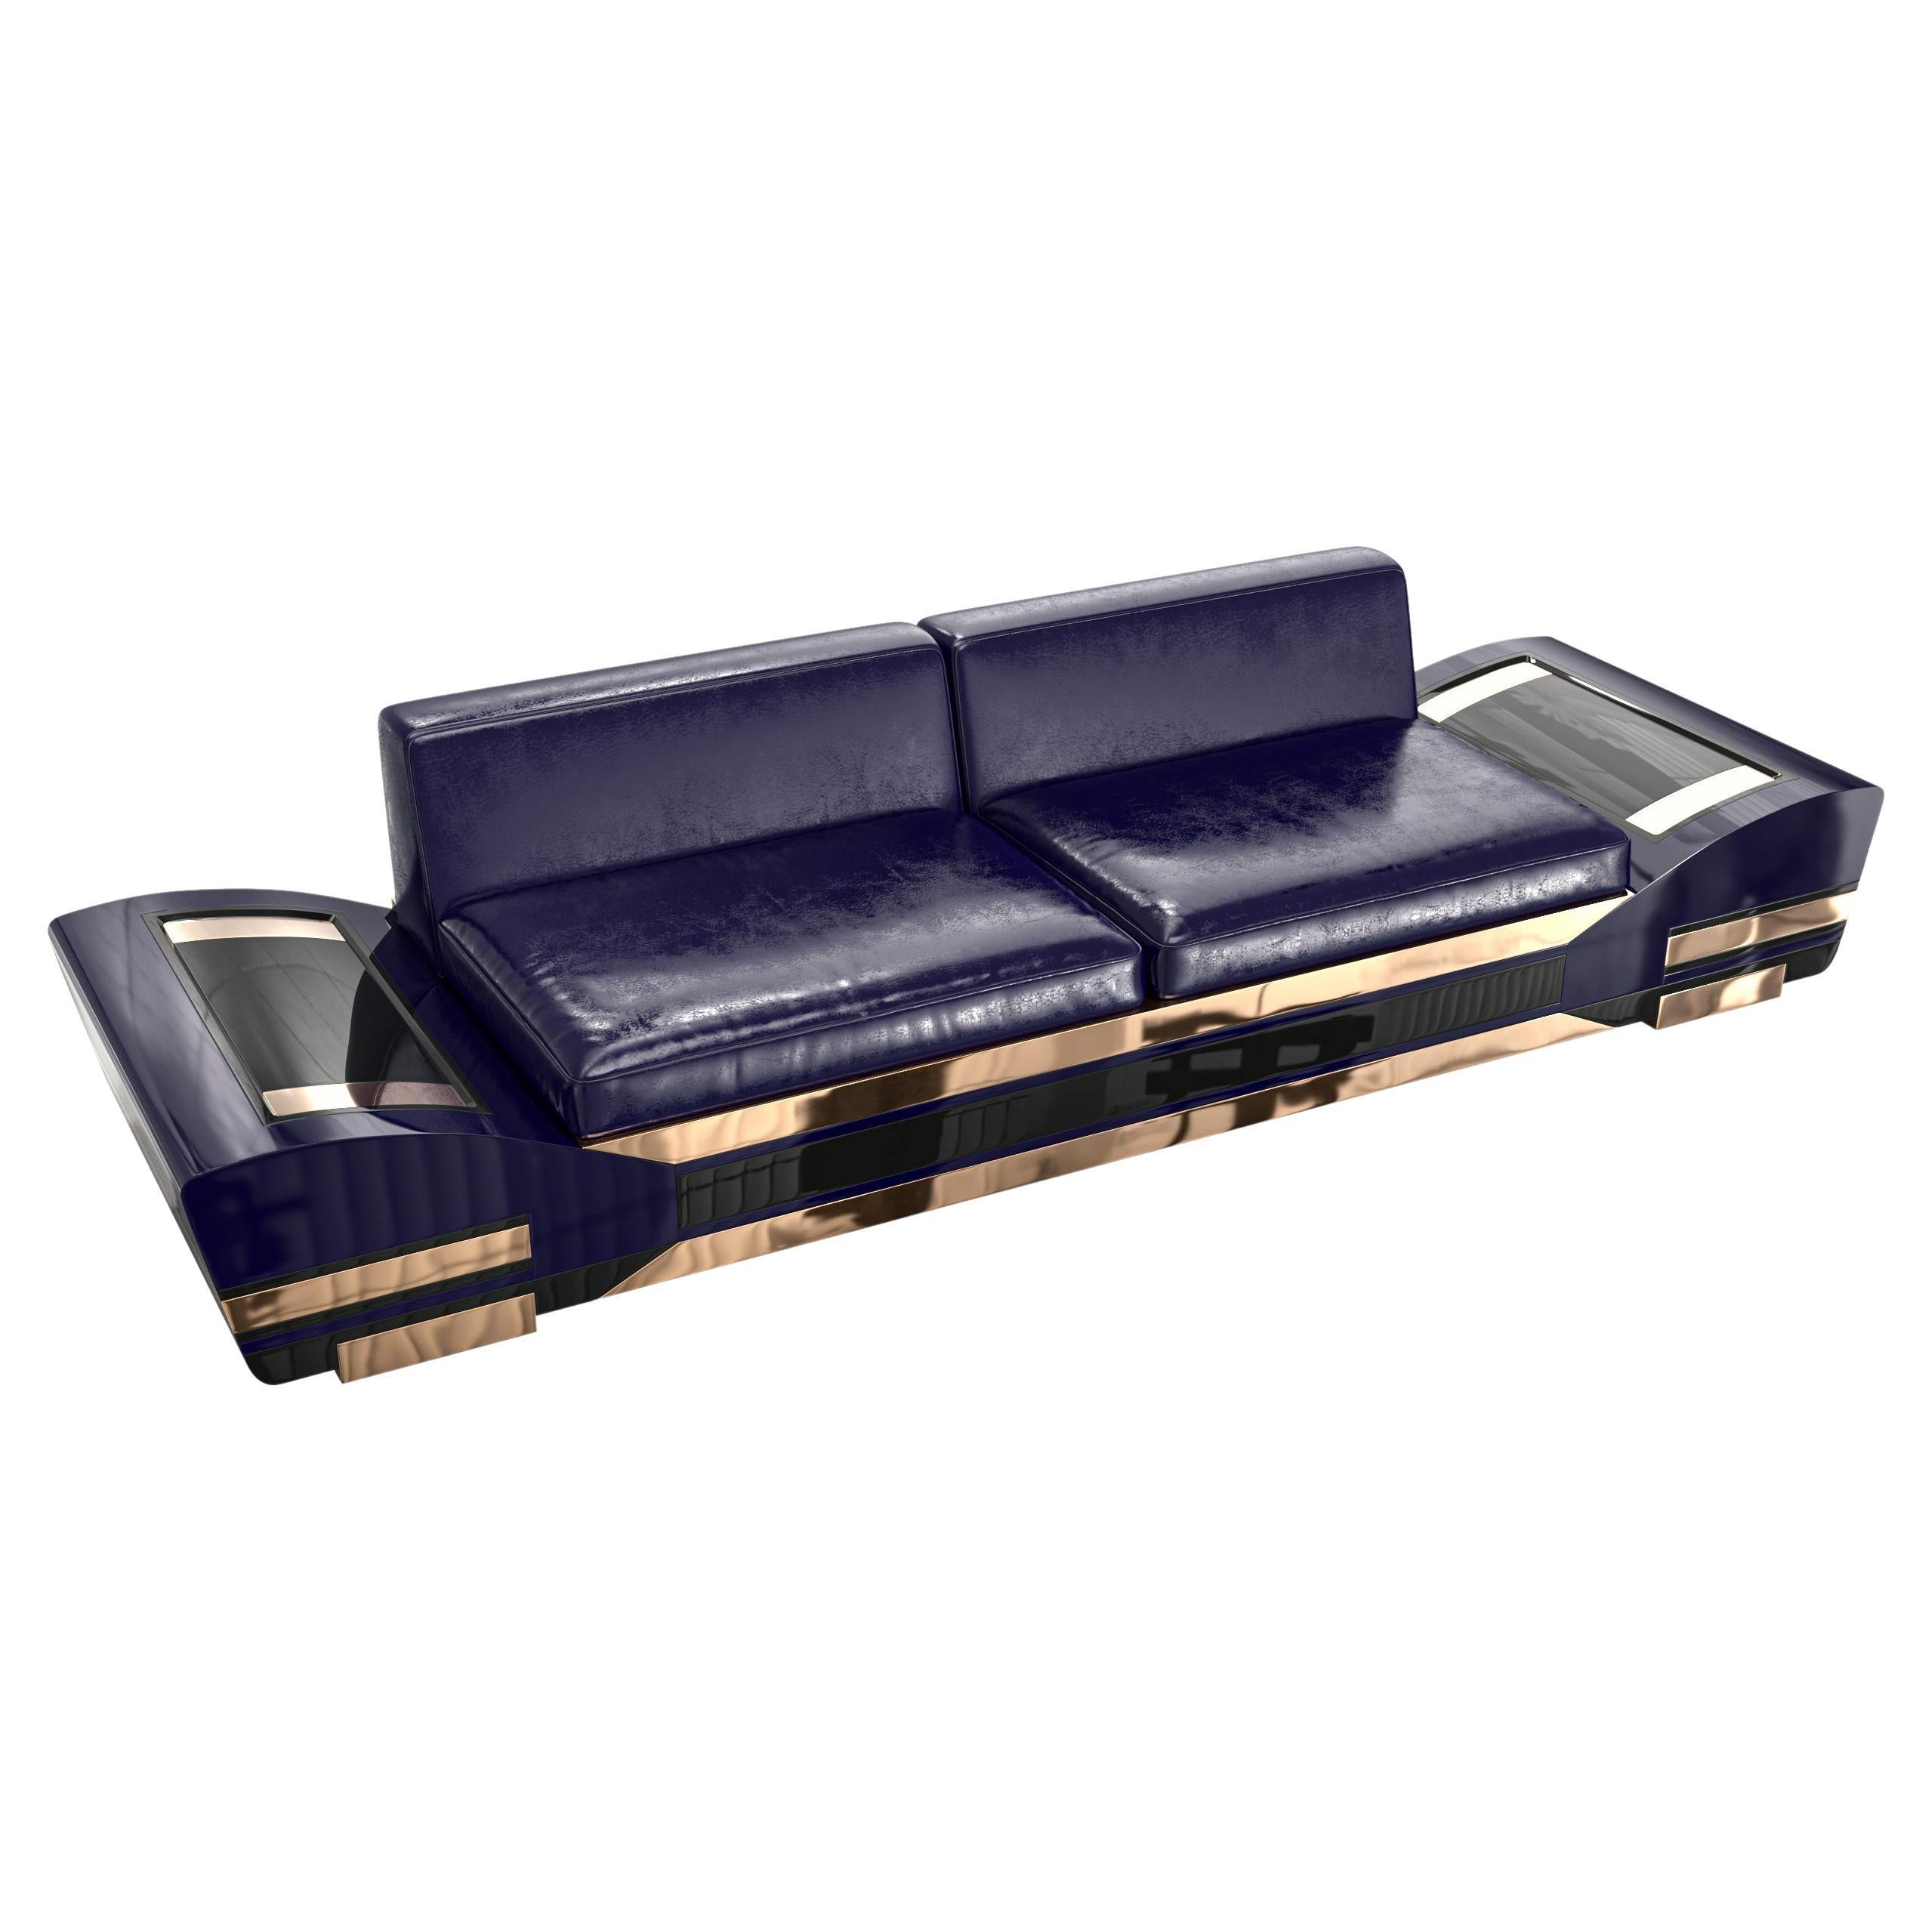 "Il Gabbiano" Sofa with Stainless Steel and Bronze Details, Istanbul